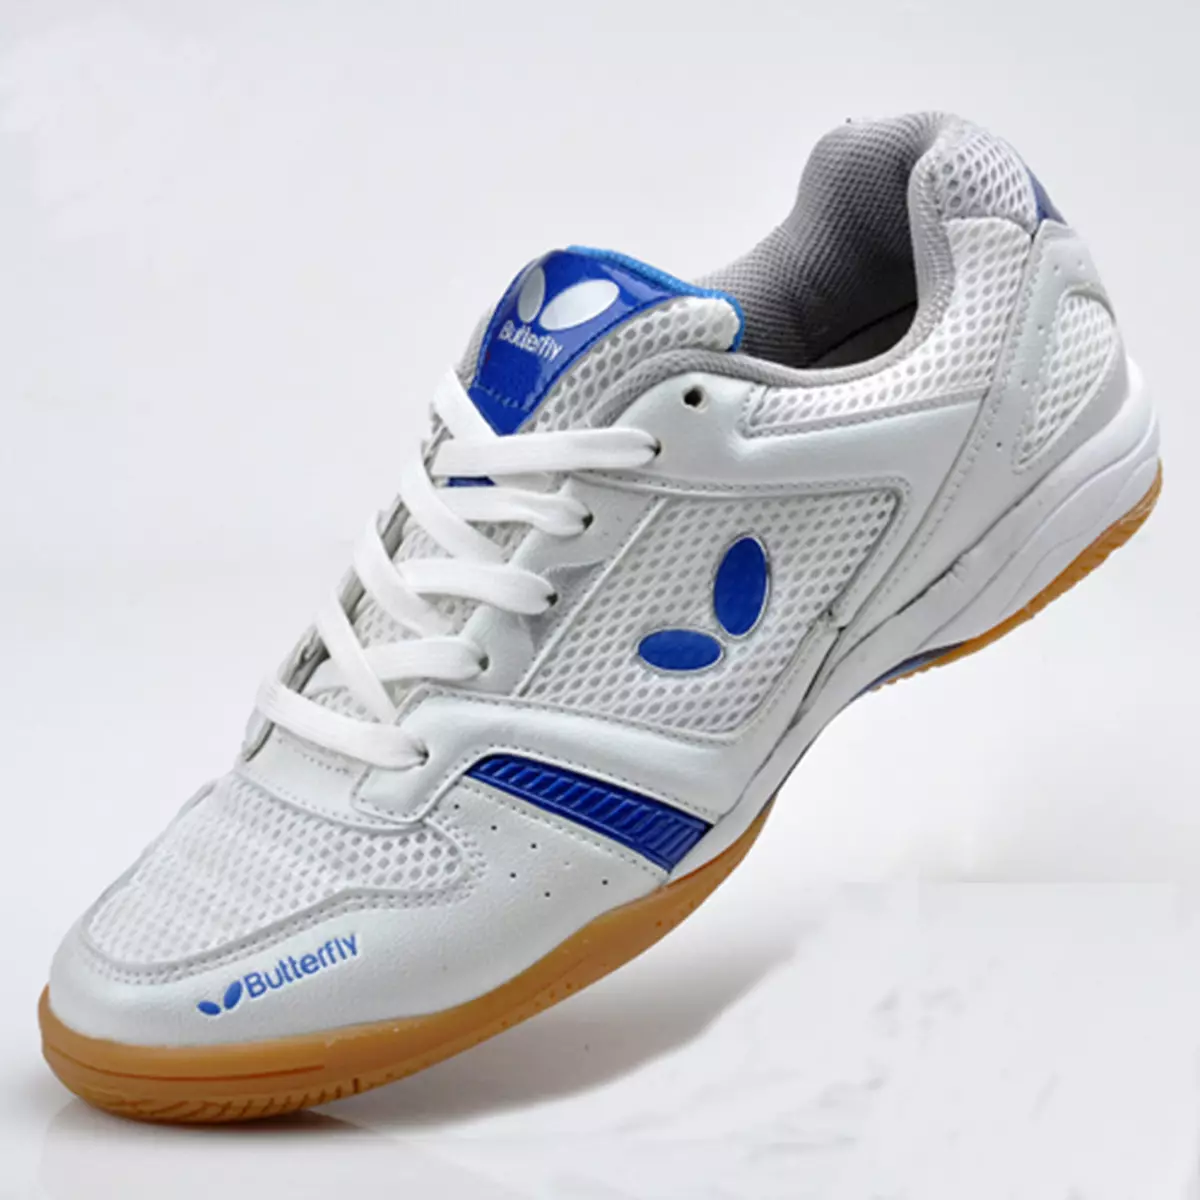 Desk Tennis Sneakers: Butterfly, Asics and Adidas shoes. How to choose the best sneakers for the game? 1706_18